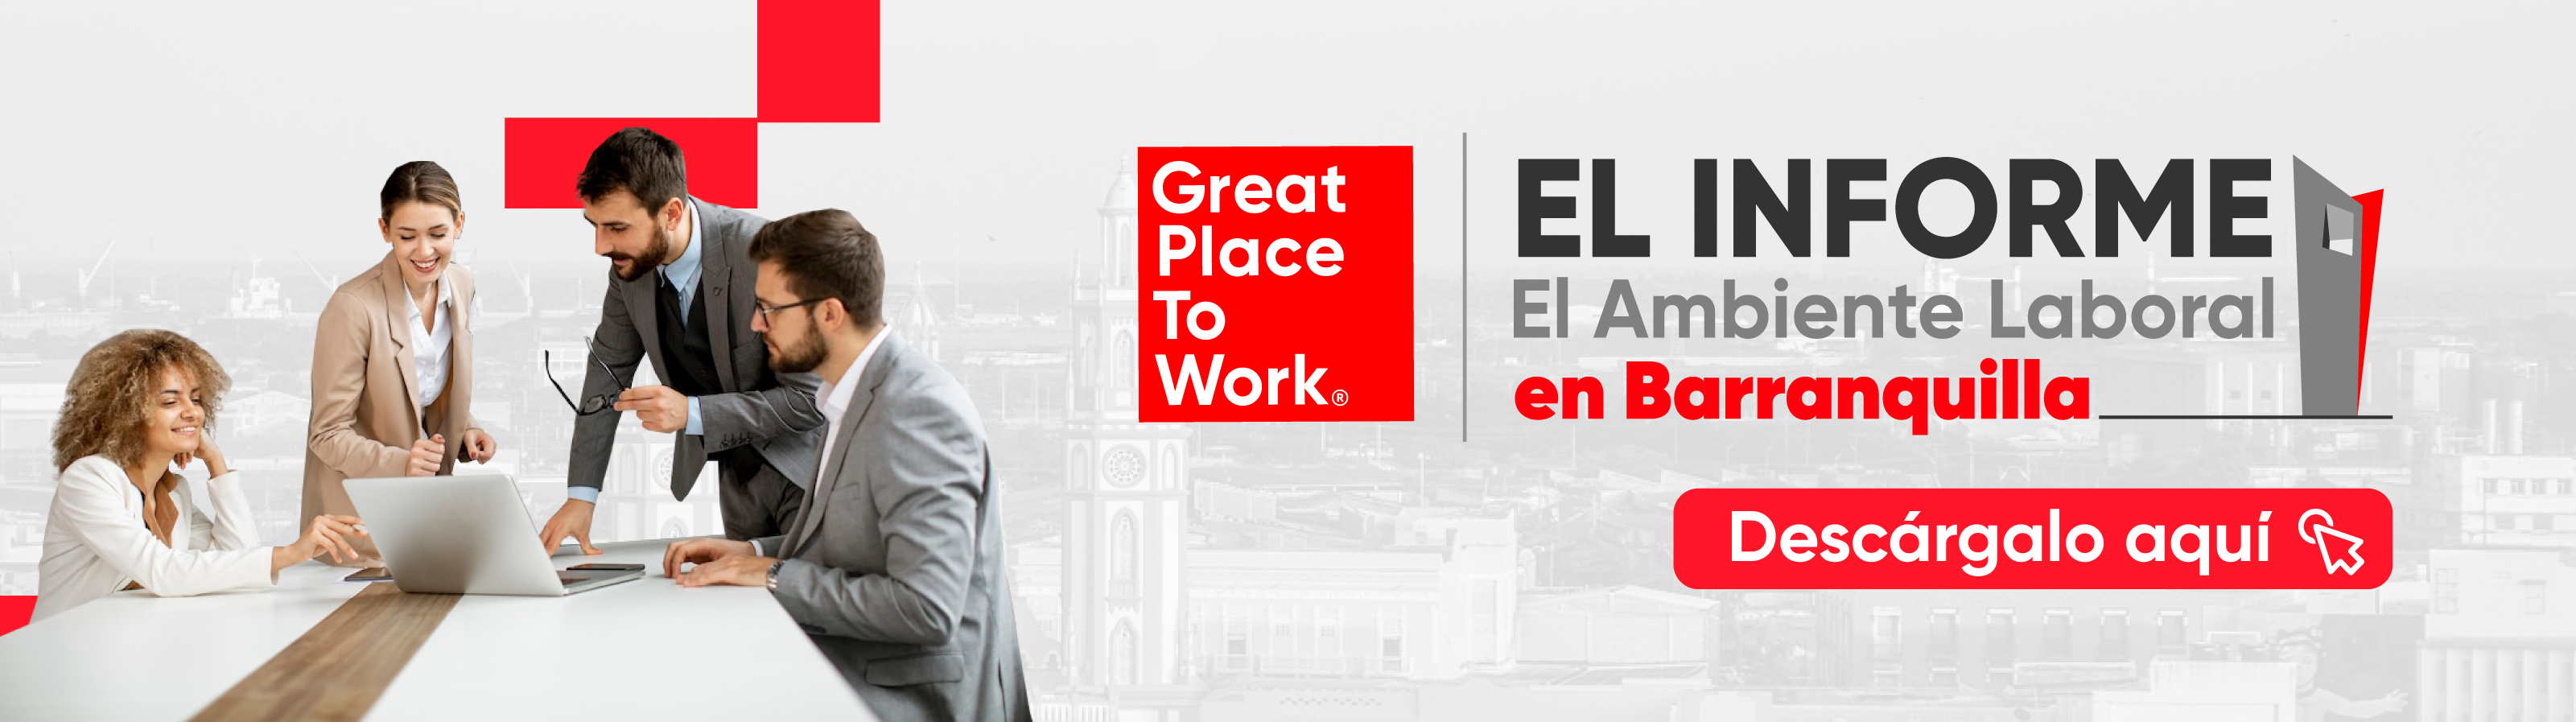 El informe bogotá Sector B2B - Great Place to Work